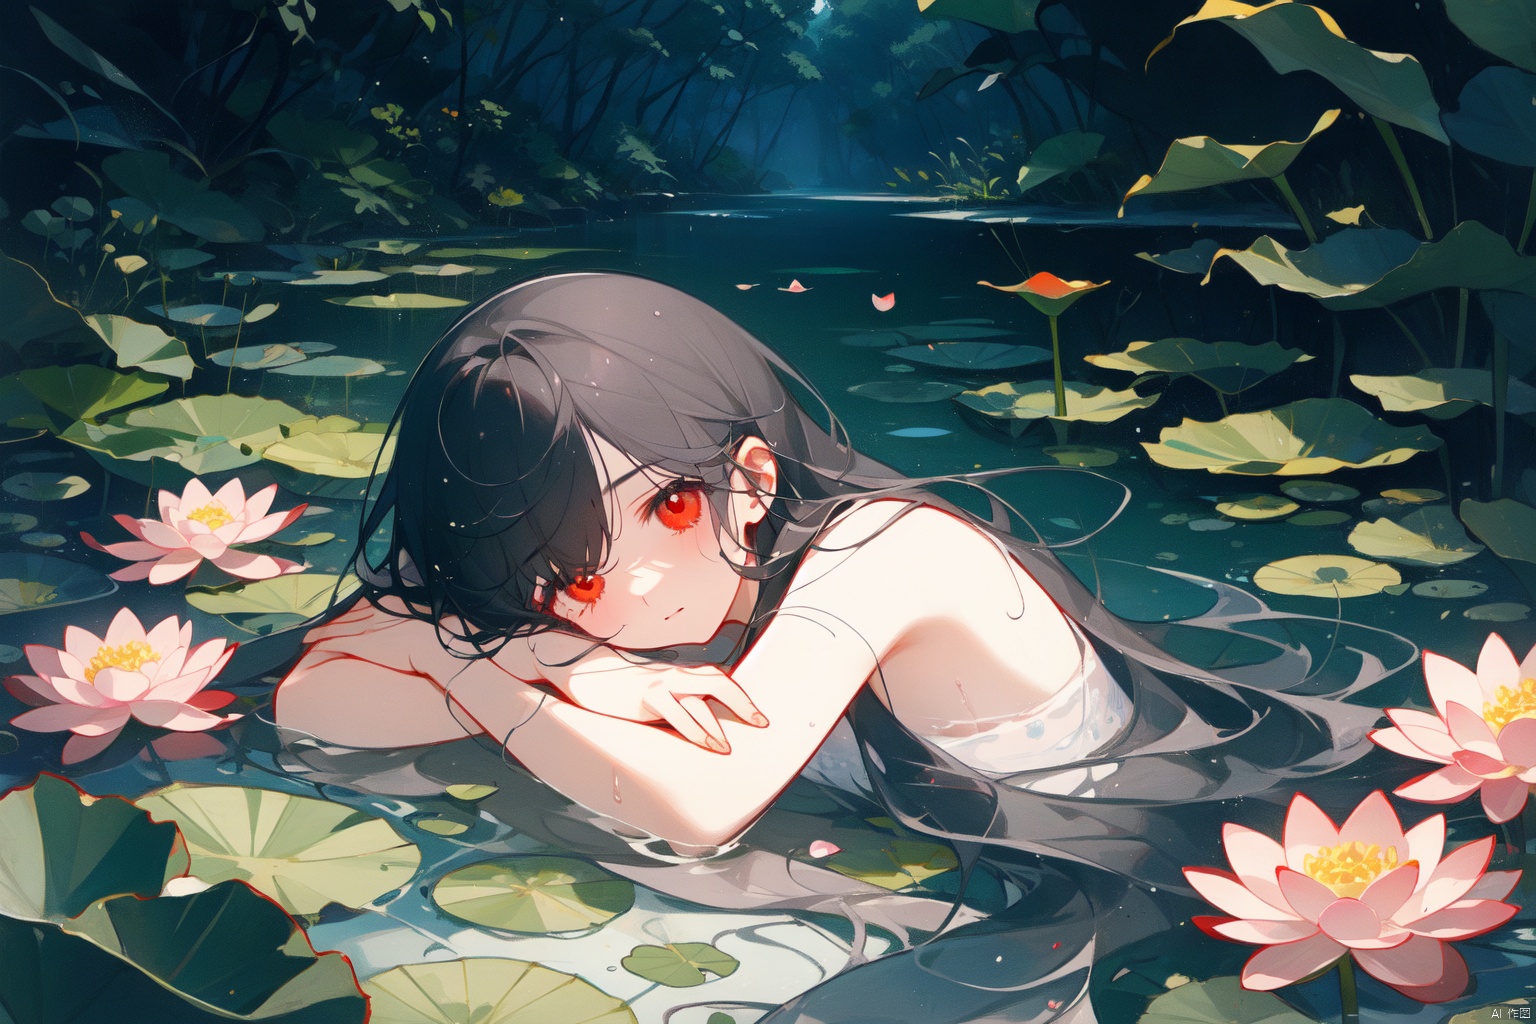 Taoist, lying on a river of blood, holding lotus flowers in his hand. The lotus flowers are stacked on top of him, creating a dark atmosphere. A girl with black hair and red eyes is lying in the water, creating a dark, evil, and gloomy atmosphere. Dark tone,lying,lying in the water,
仰躺supine

